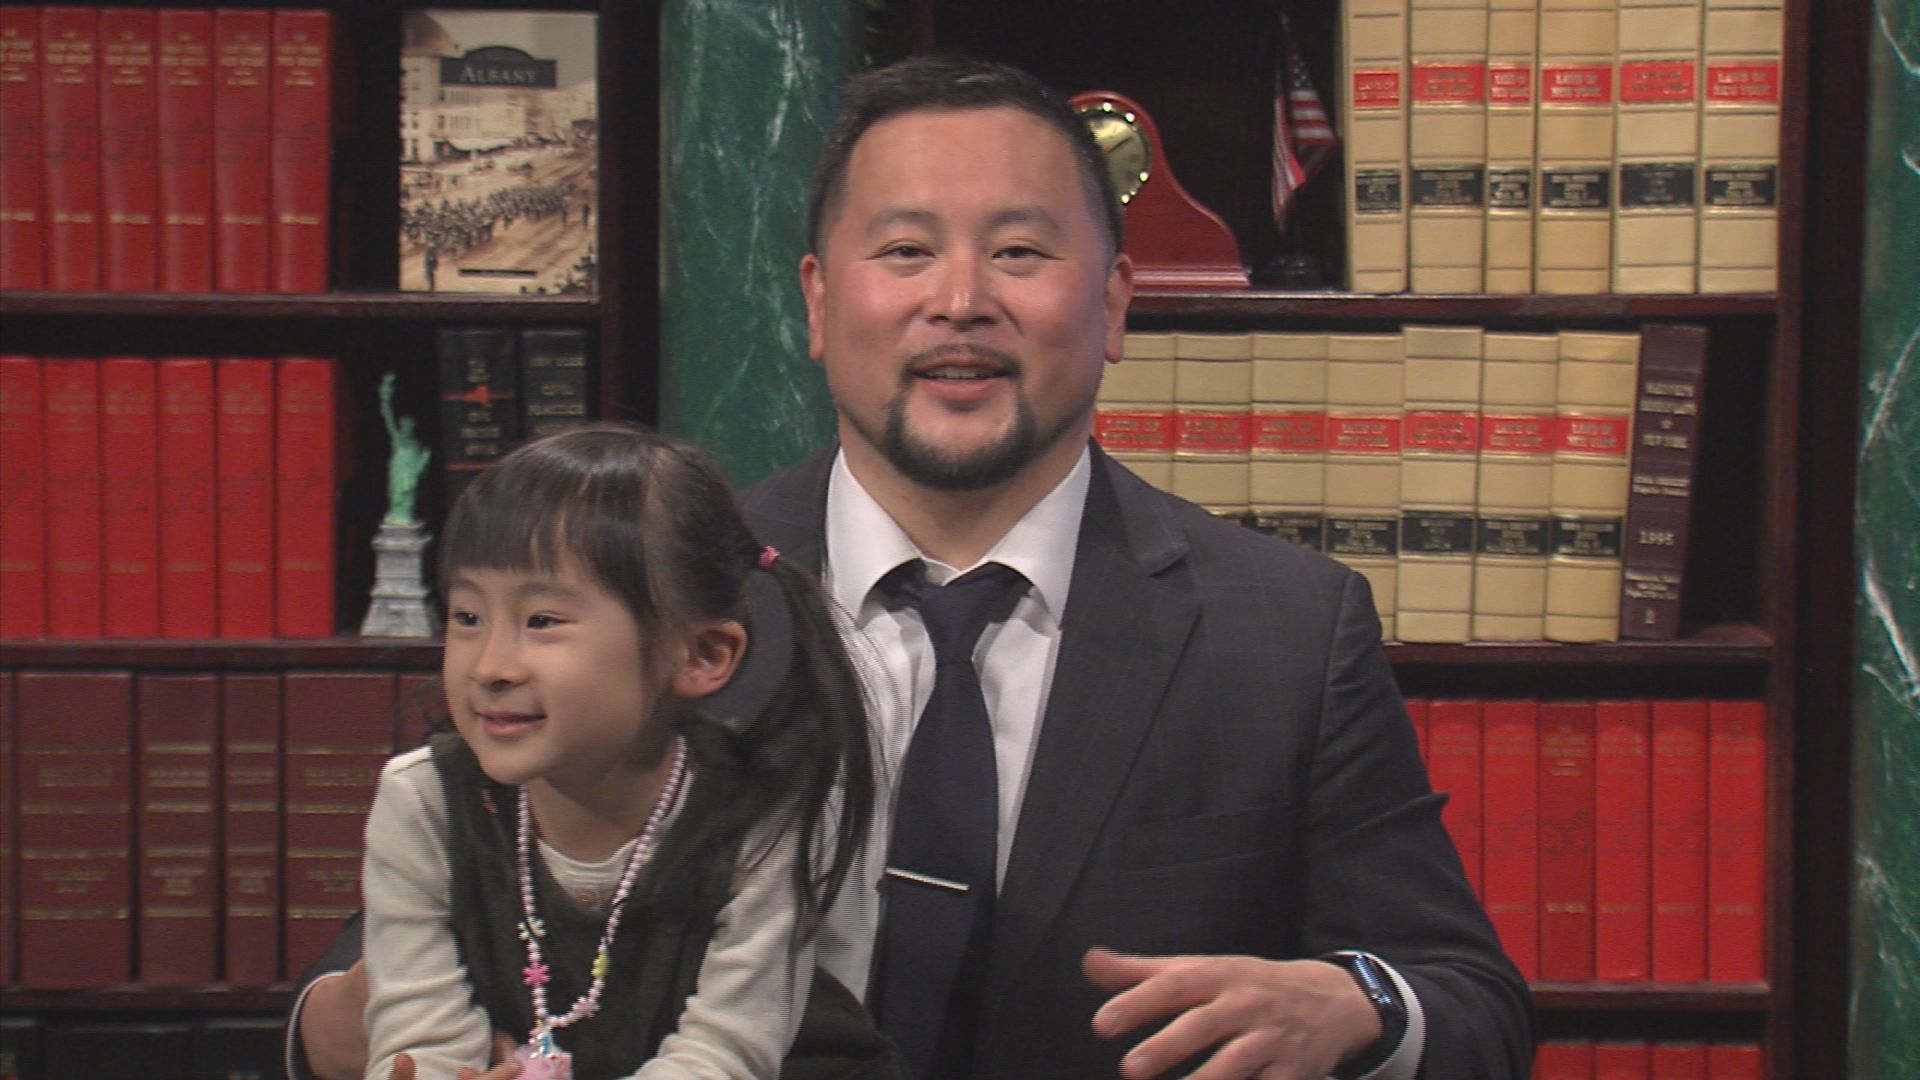 Assemblymember Kim Introduces his Daughters to Constituents